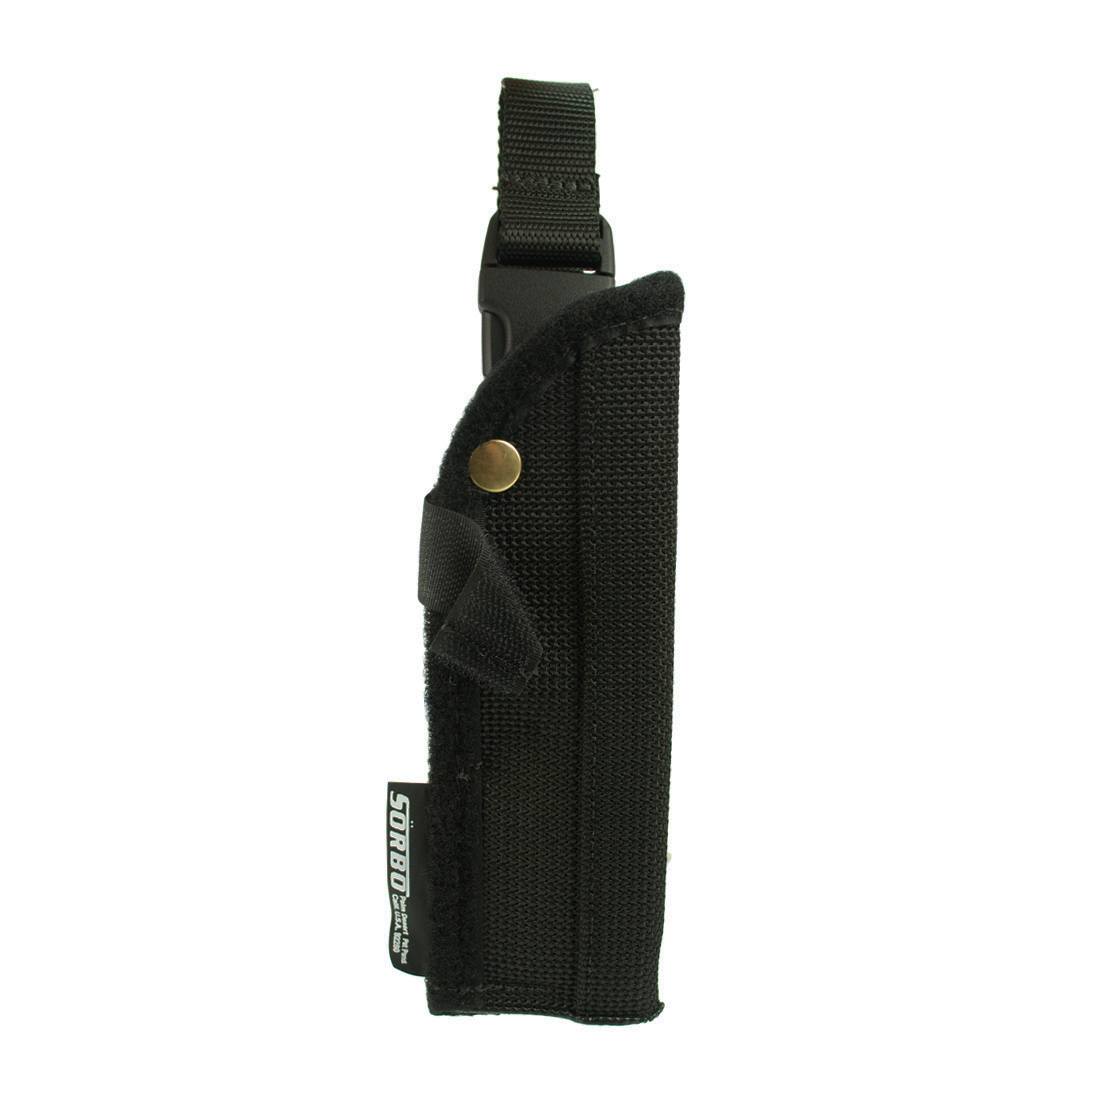 Sörbo Scraper Holster - Buckle Up - Front View